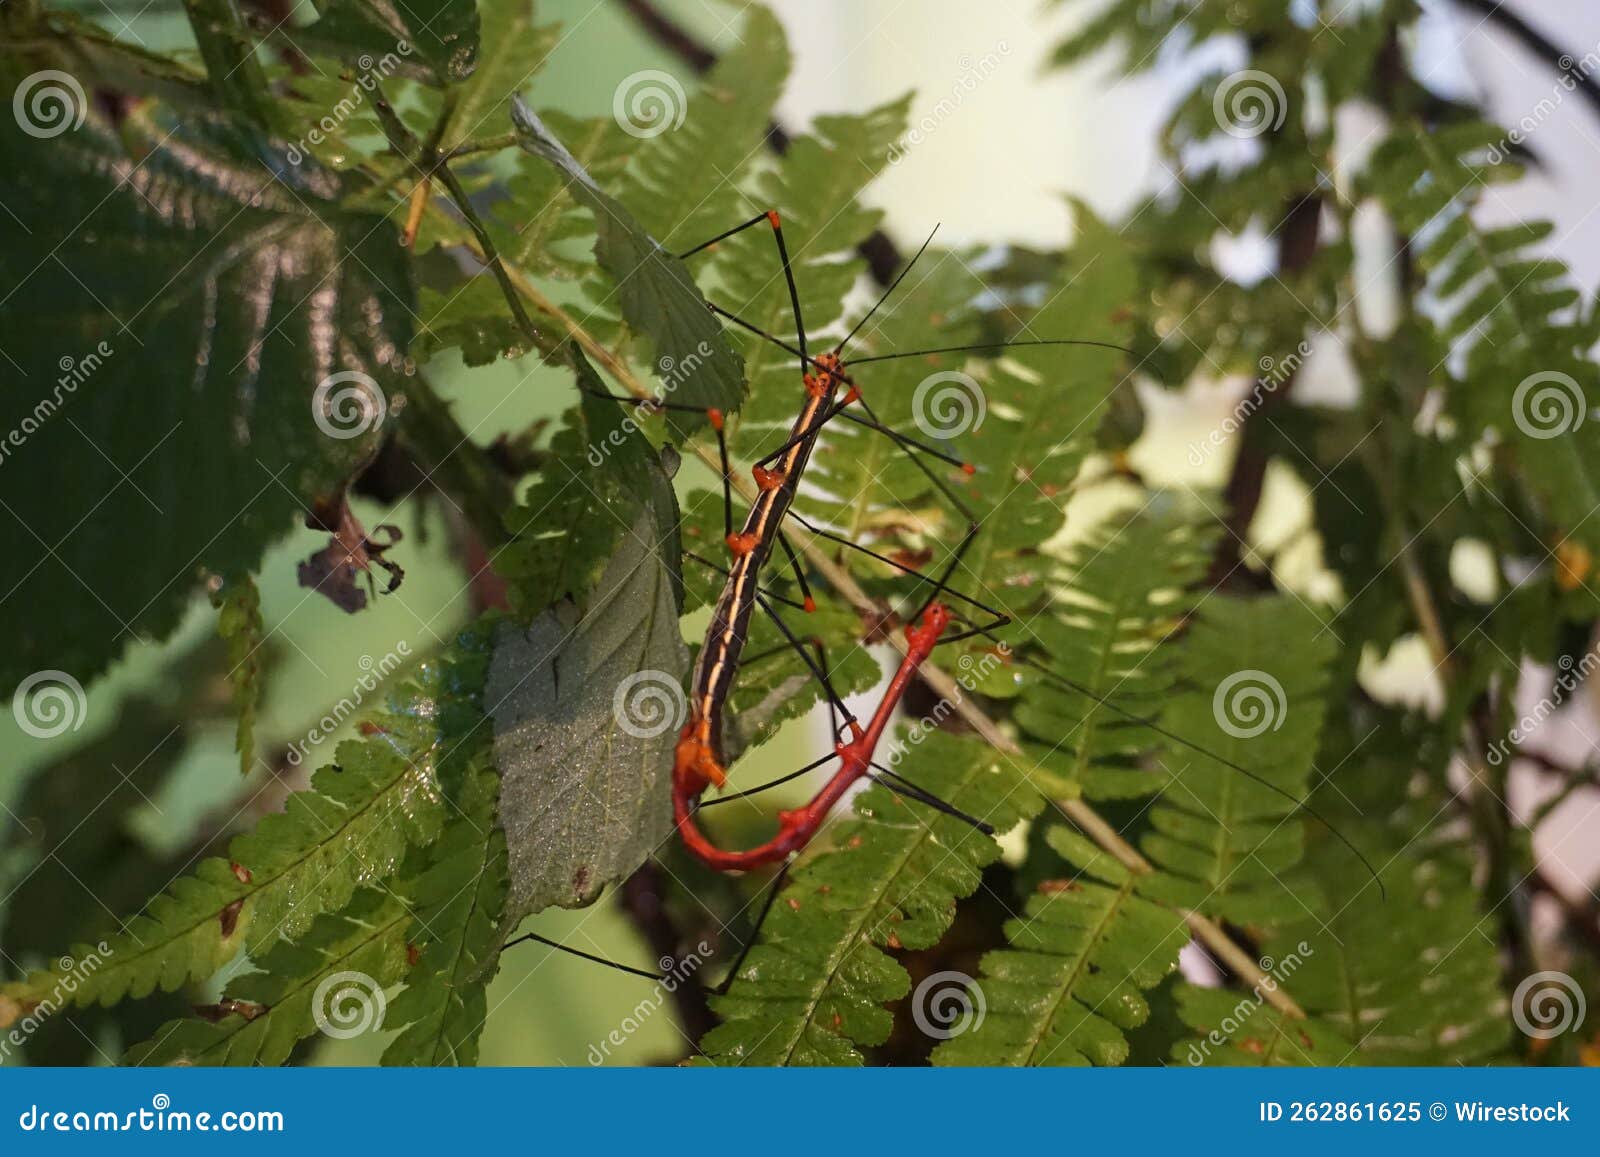 closeup shot of a stick insect in a tree - oreophoetes peruana